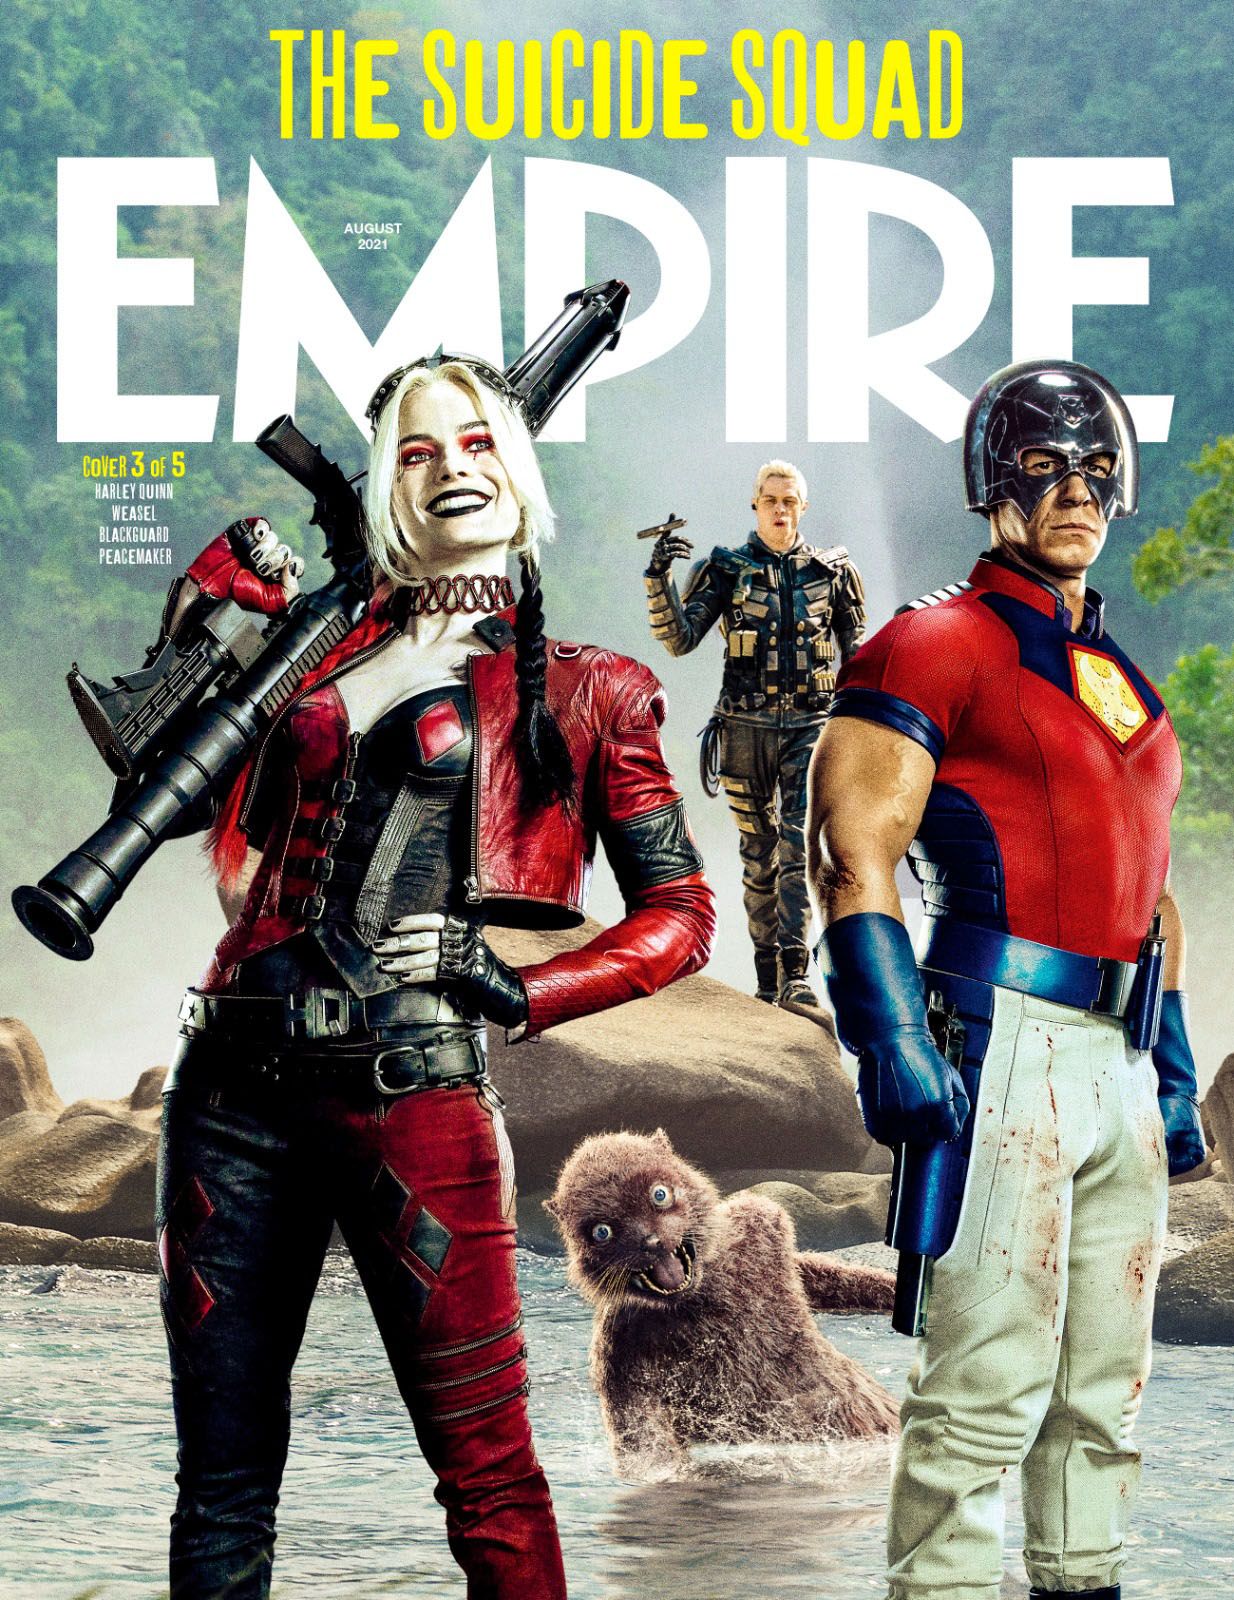 Harley Quinn, Weasel, Blackguard and Peacemaker The Suicide Squad Empire Magazine Cover 